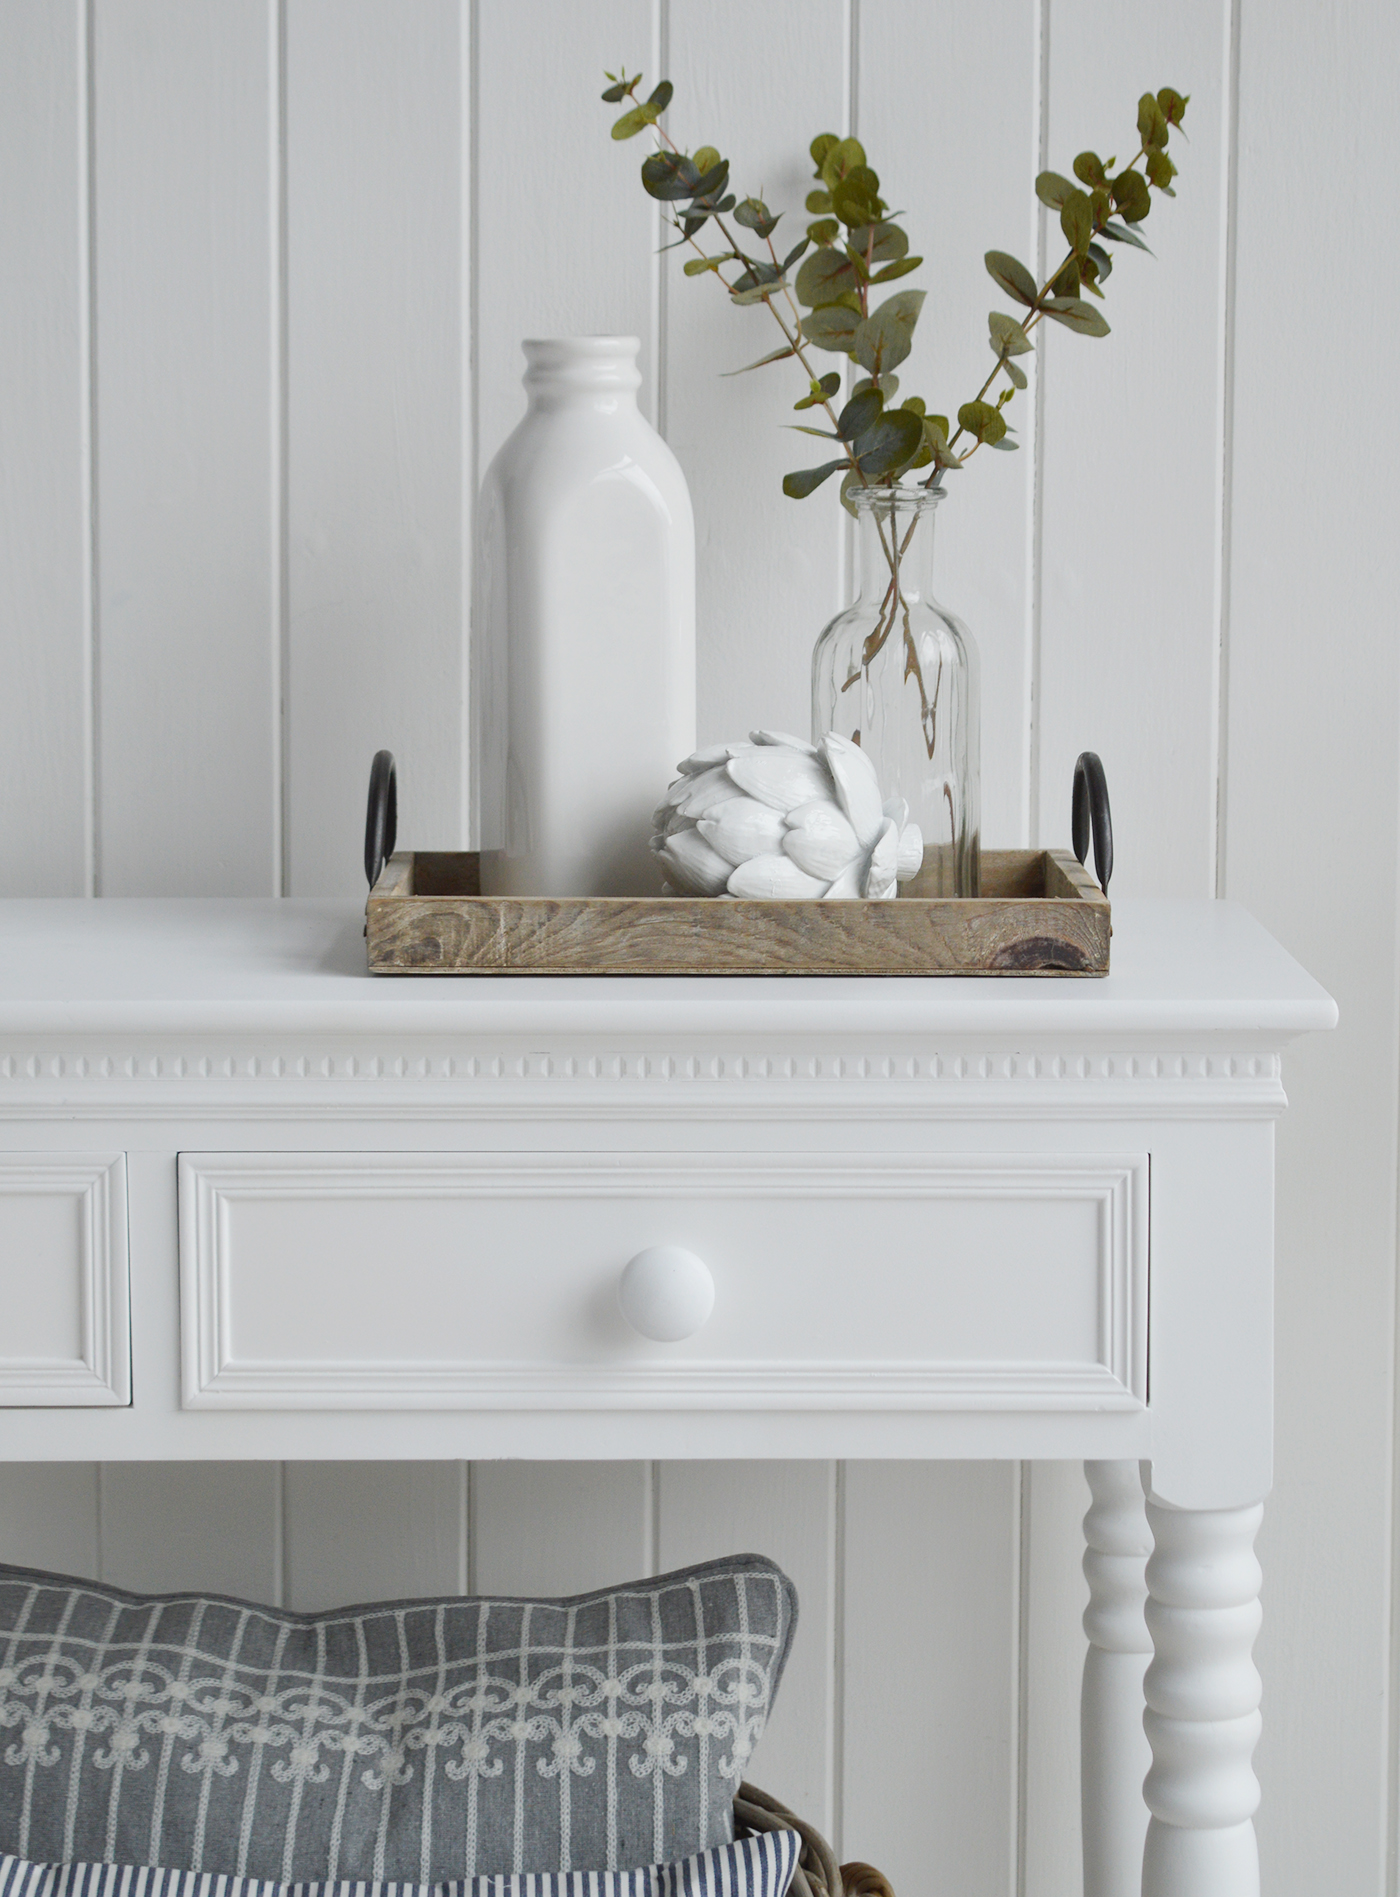 White Decorative Home Accessories and Decor for New England style interiors